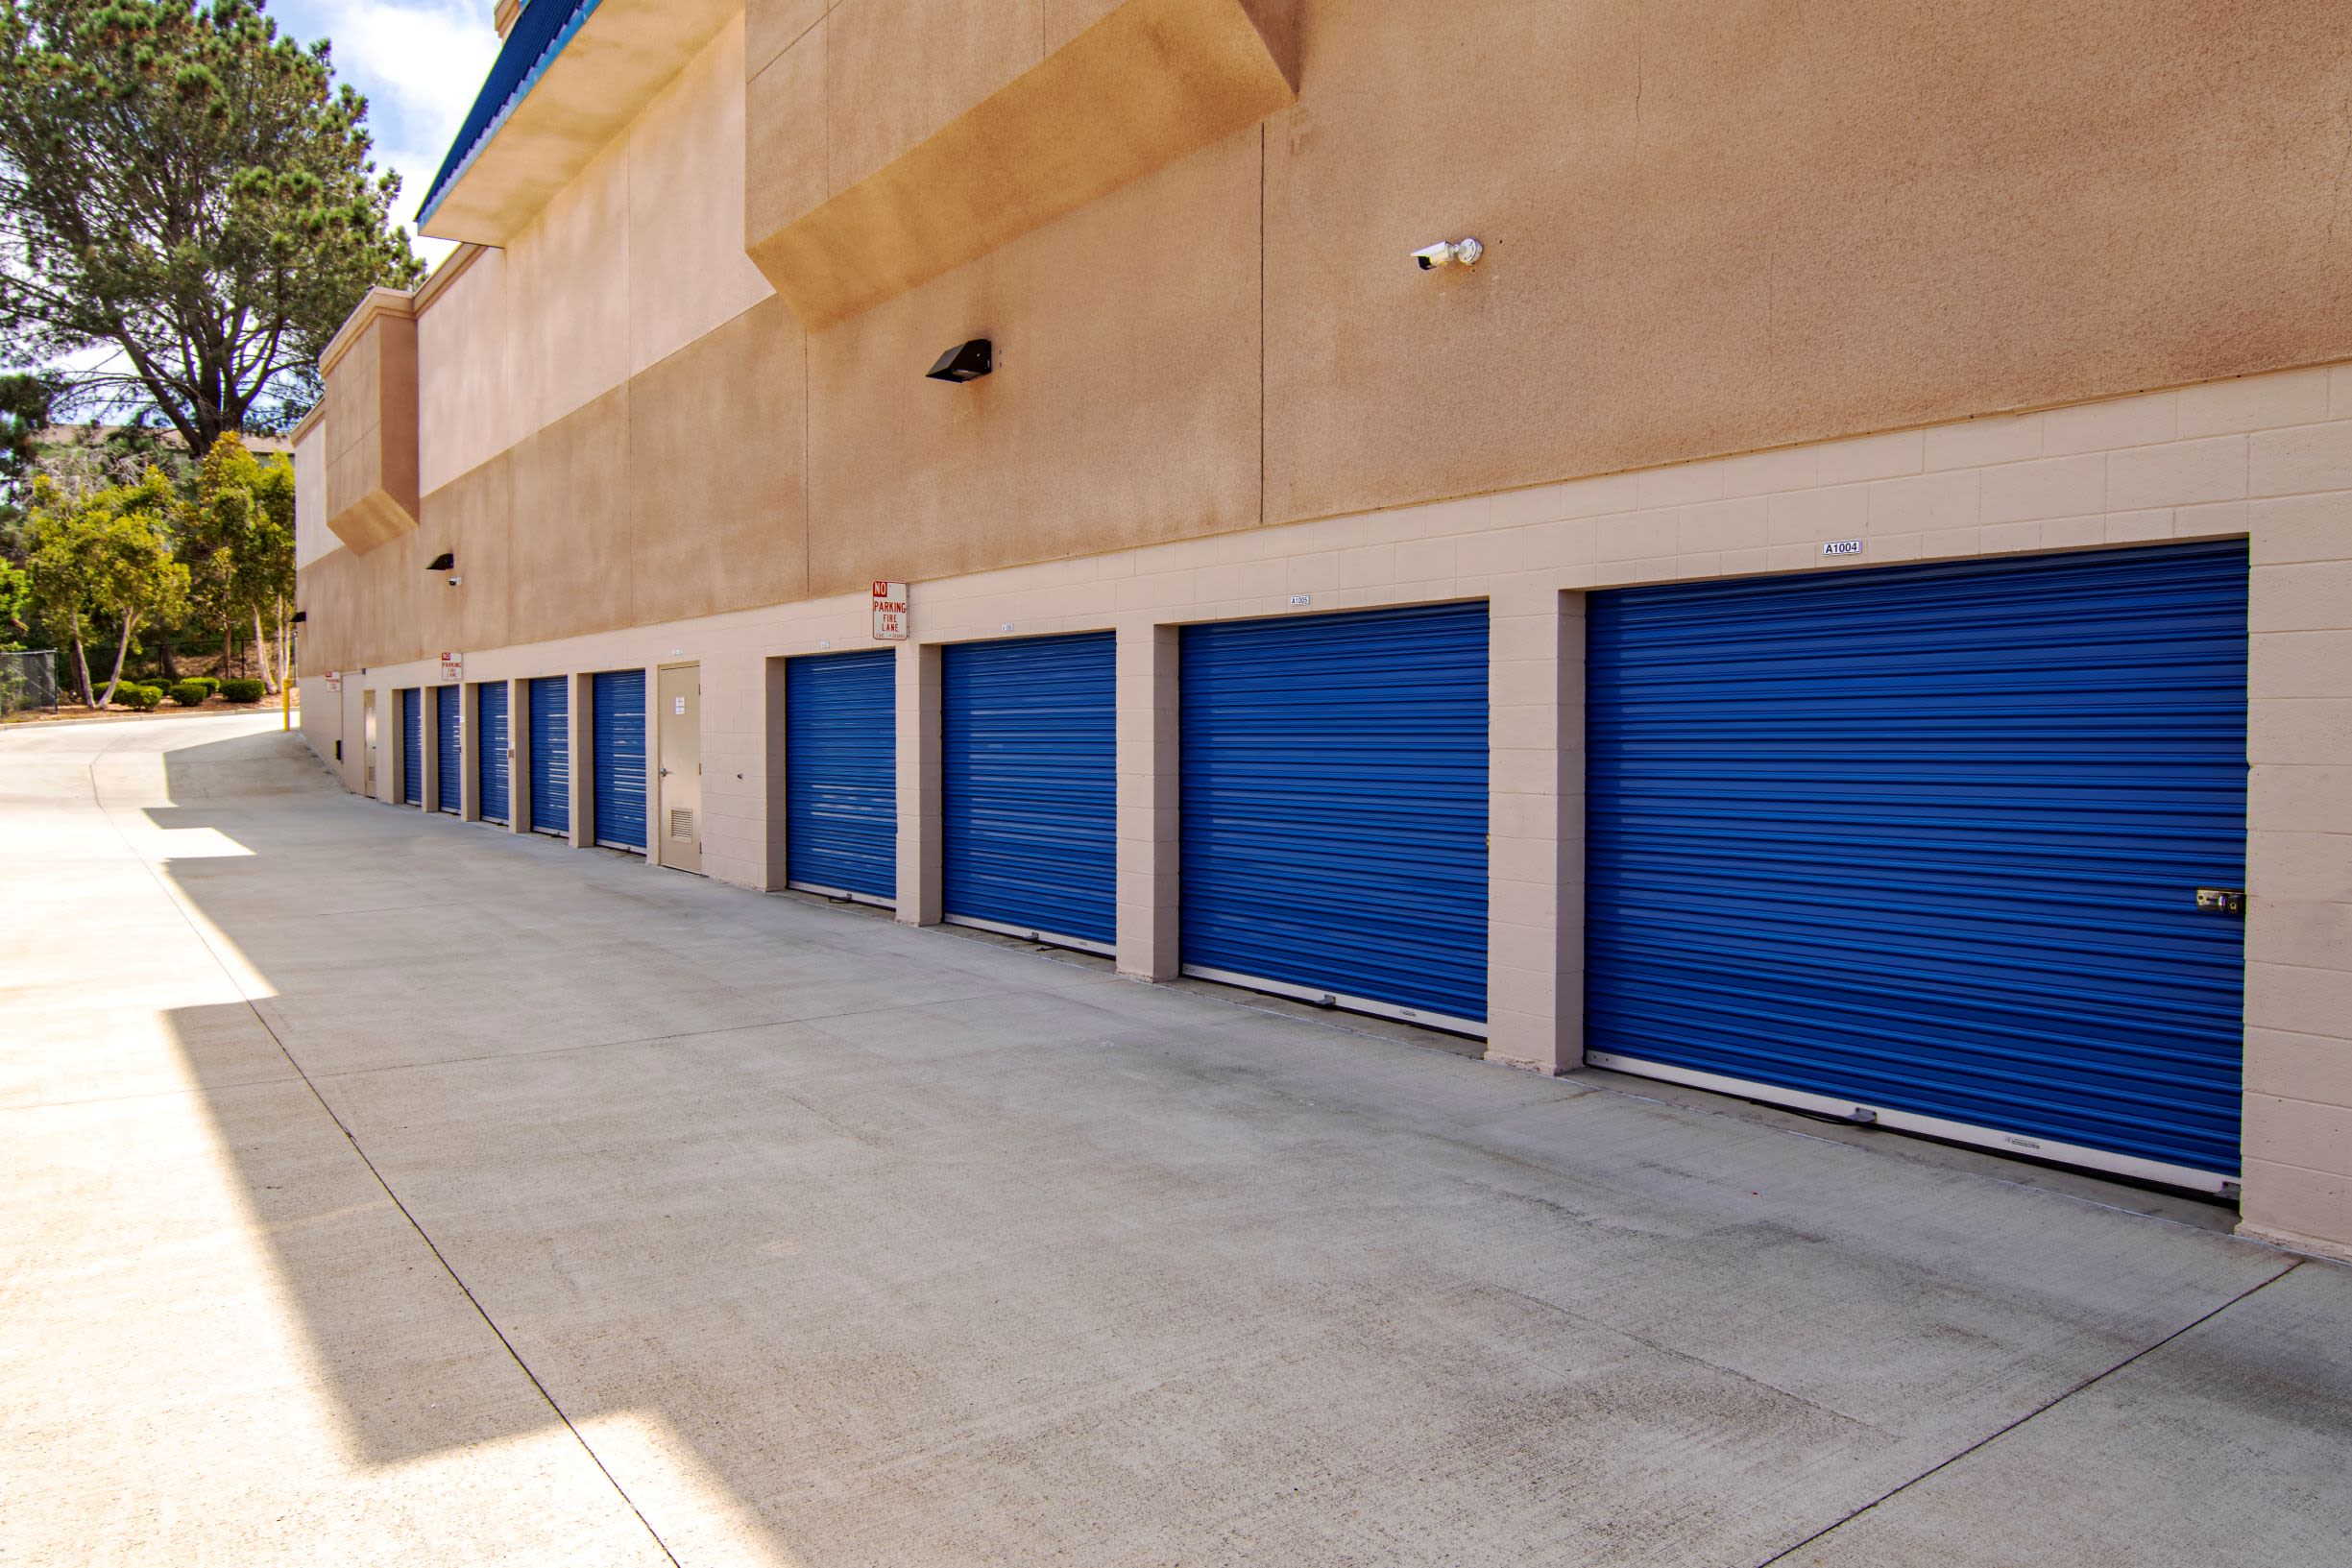 A row of outdoor storage units at Smart Self Storage of Solana Beach in Solana Beach, CA